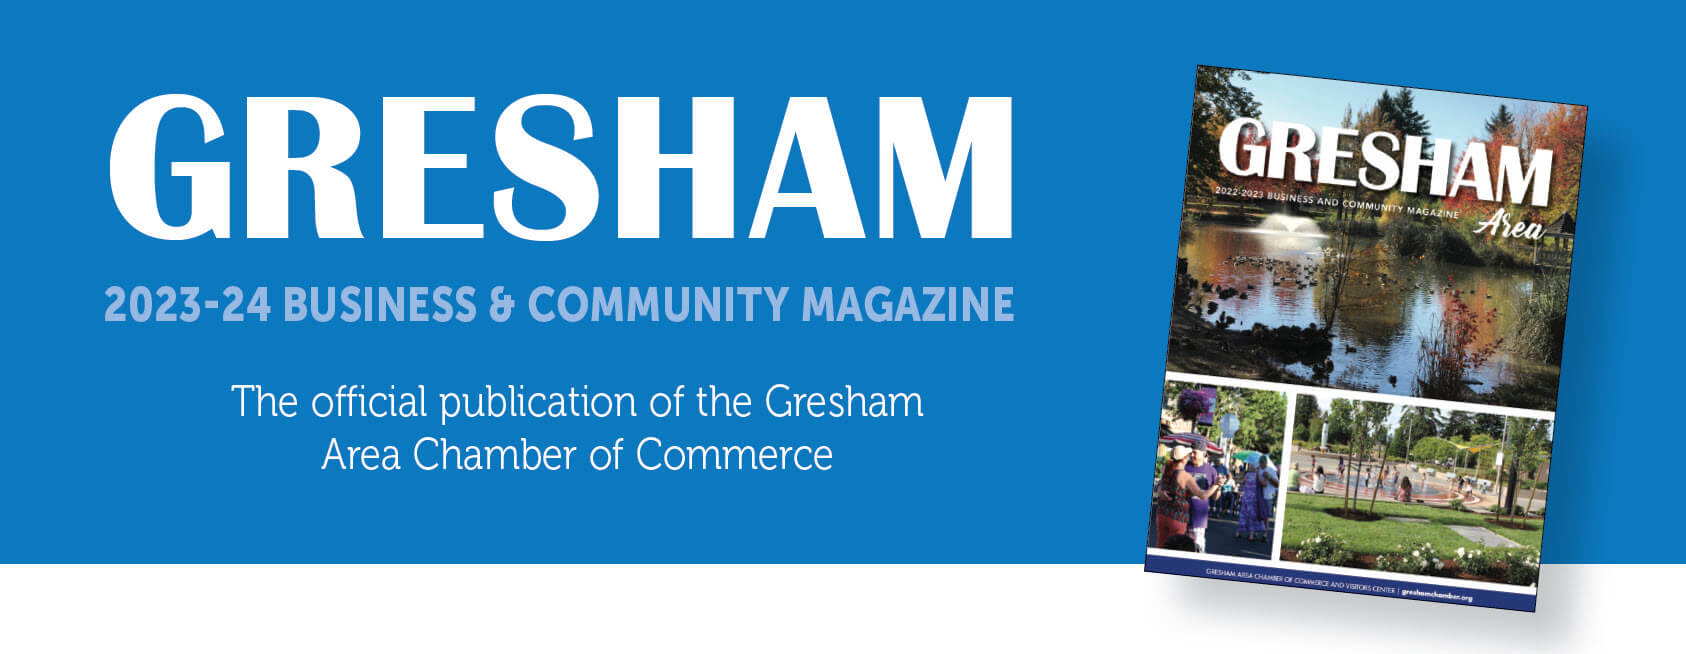 Official Publication of the Gresham Area Chamber of Commerce